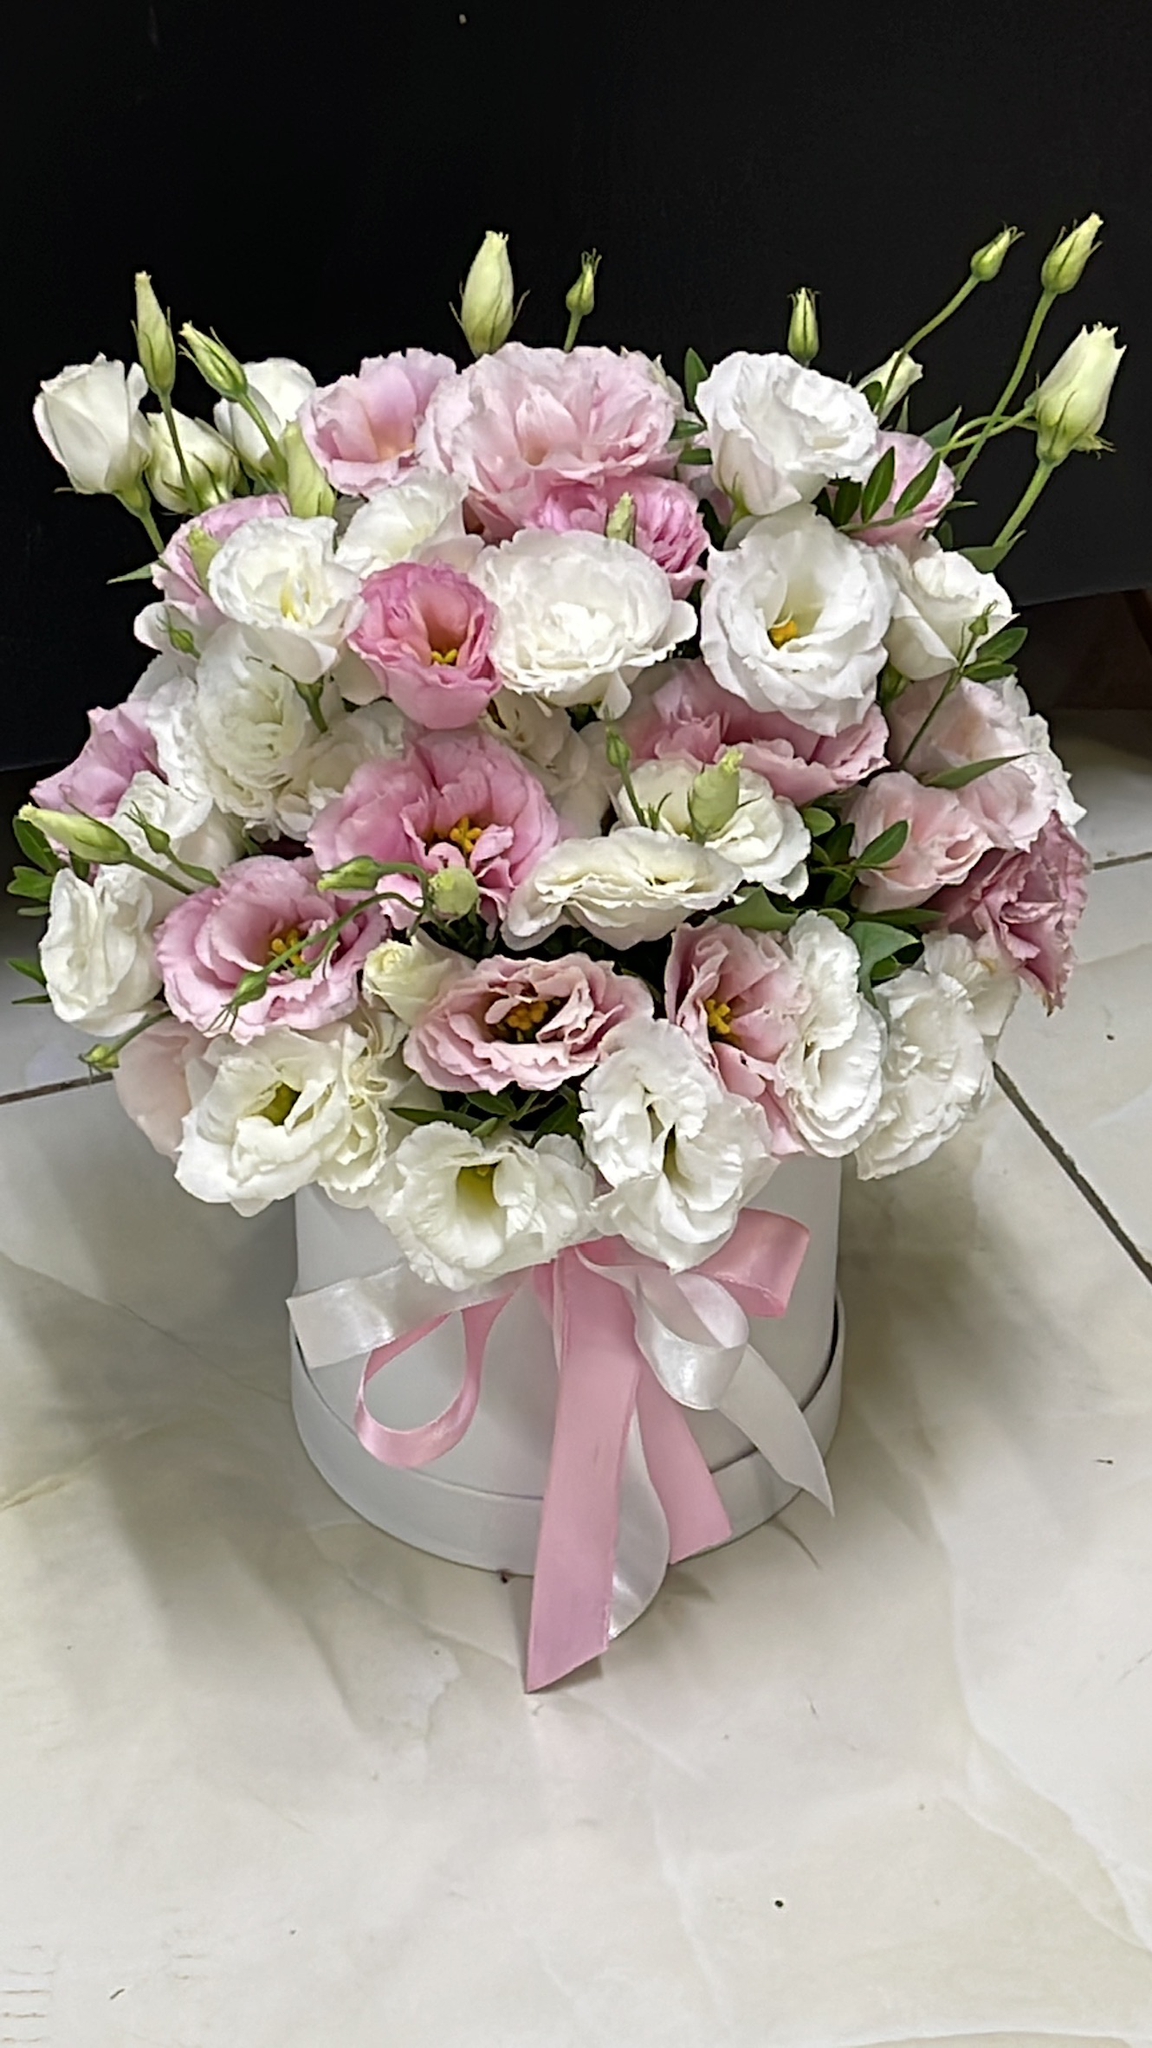  Antalya Florist Pink and White Lisianthus in a Box